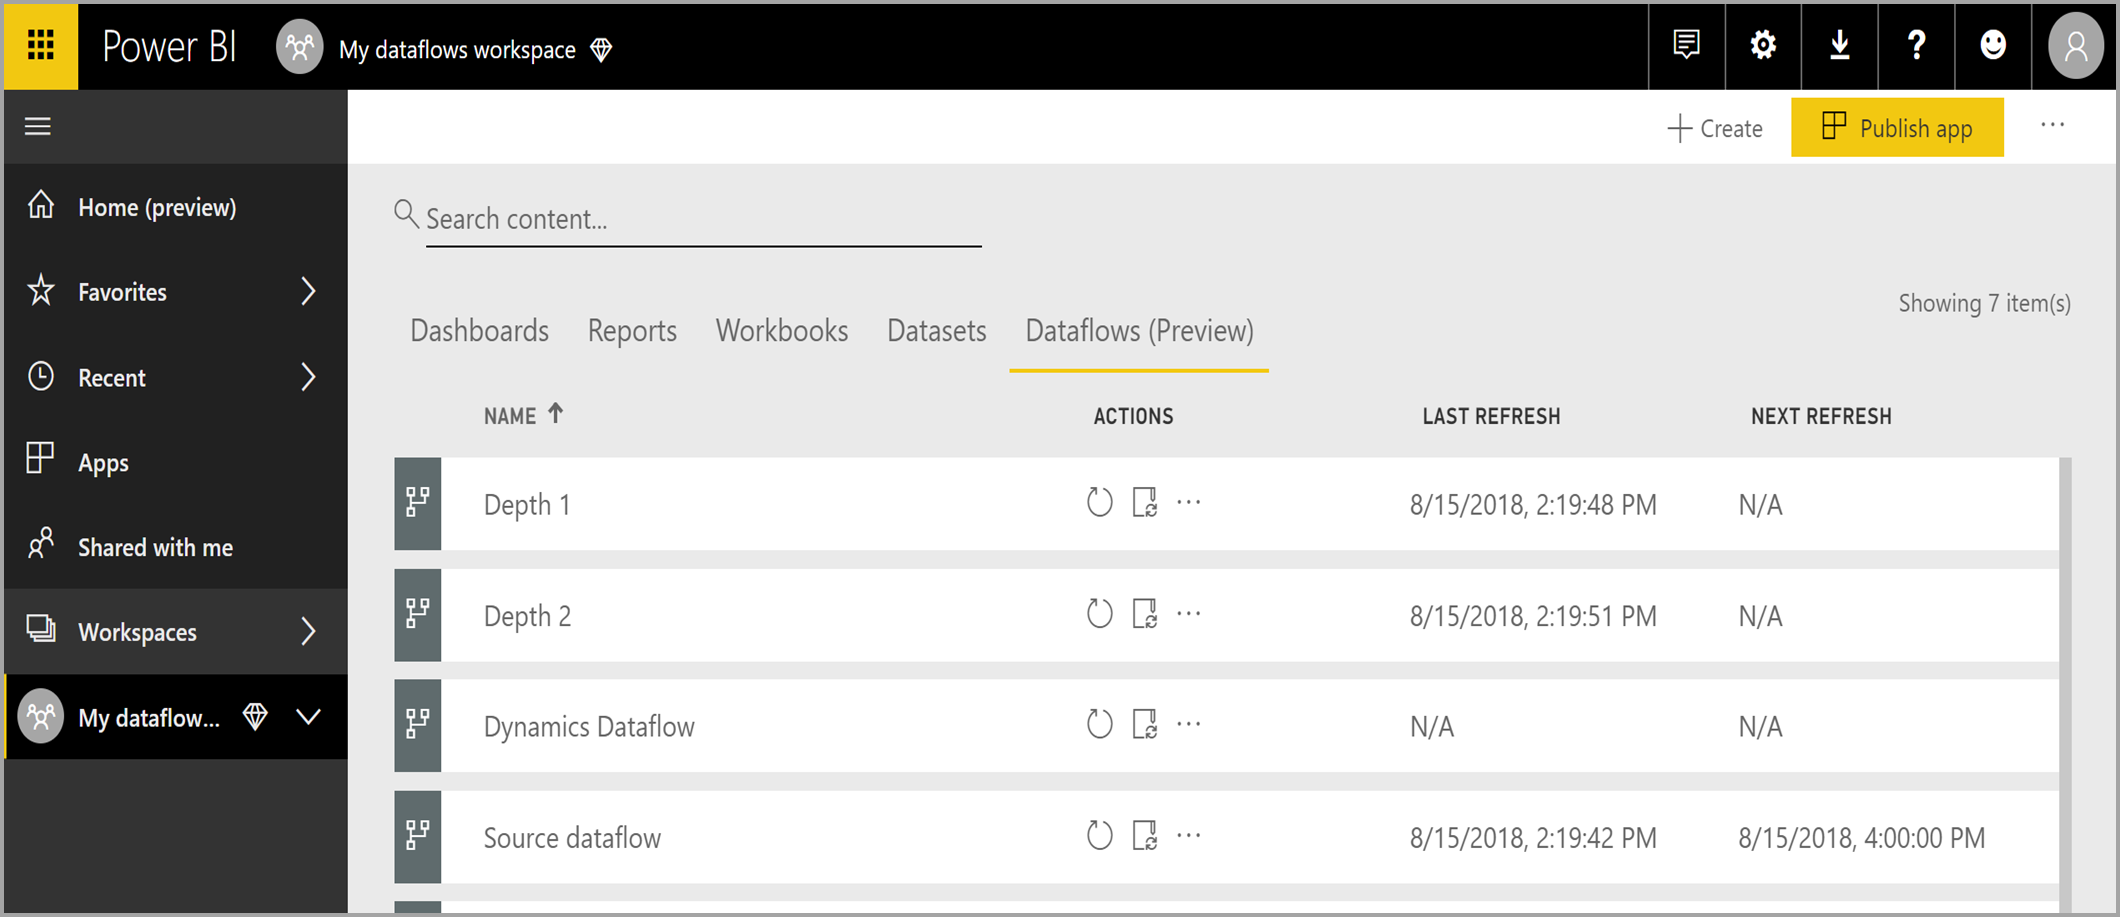 Manage dataflows in the Power BI service